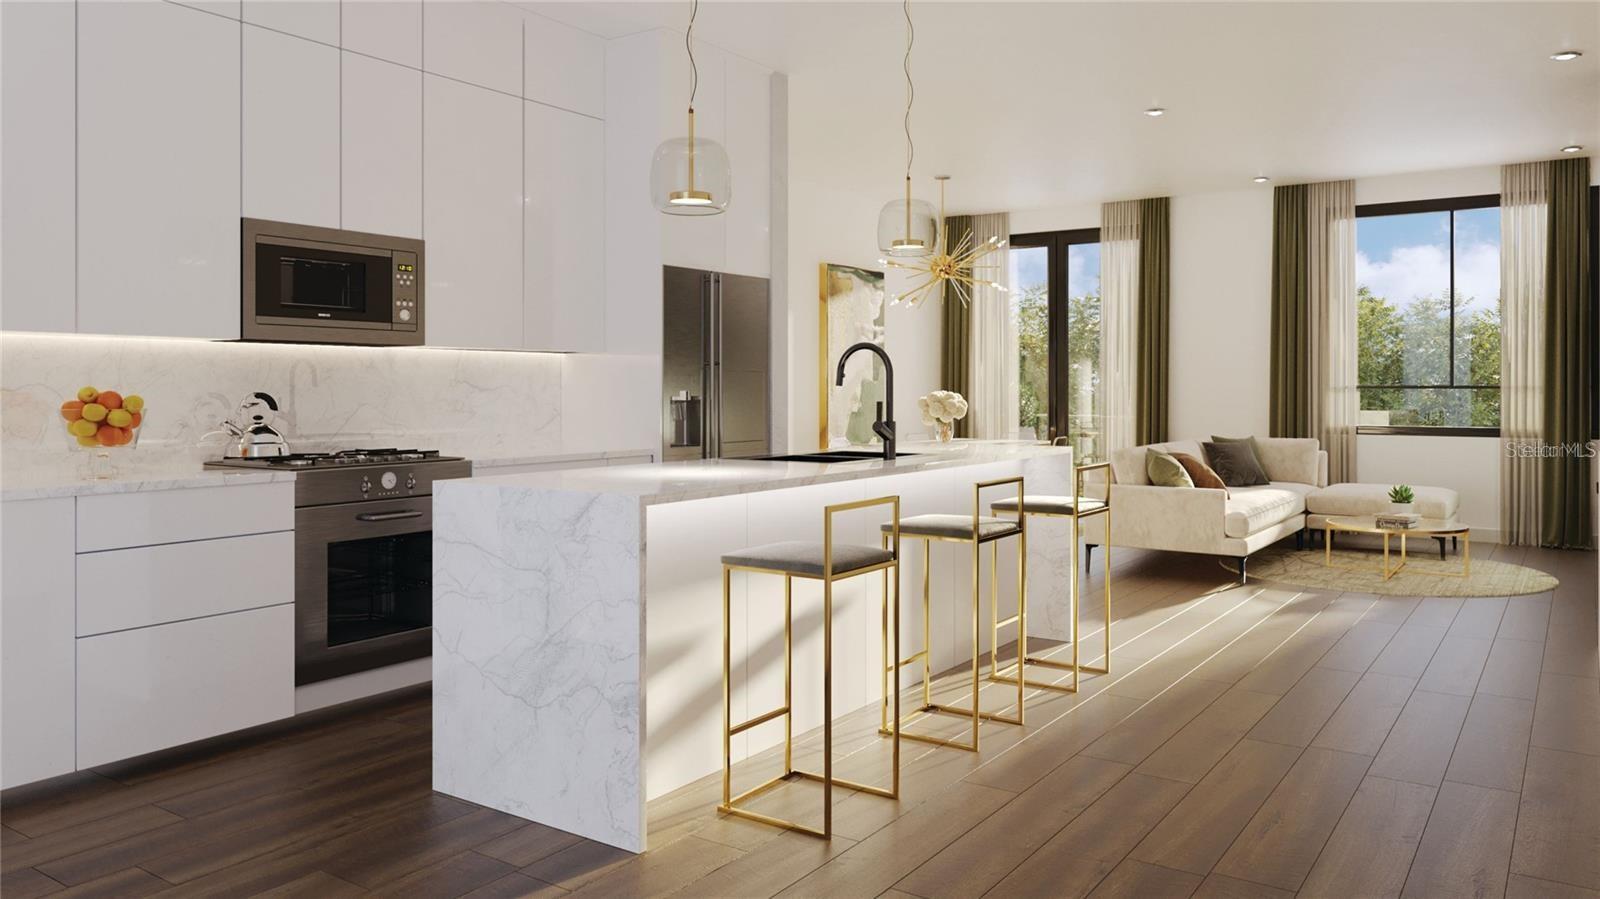 Upscale Kitchen cabinetry finished with calacatta countertops with an 10 foot double edge waterfall island. 3 designer kitchen options to choose from